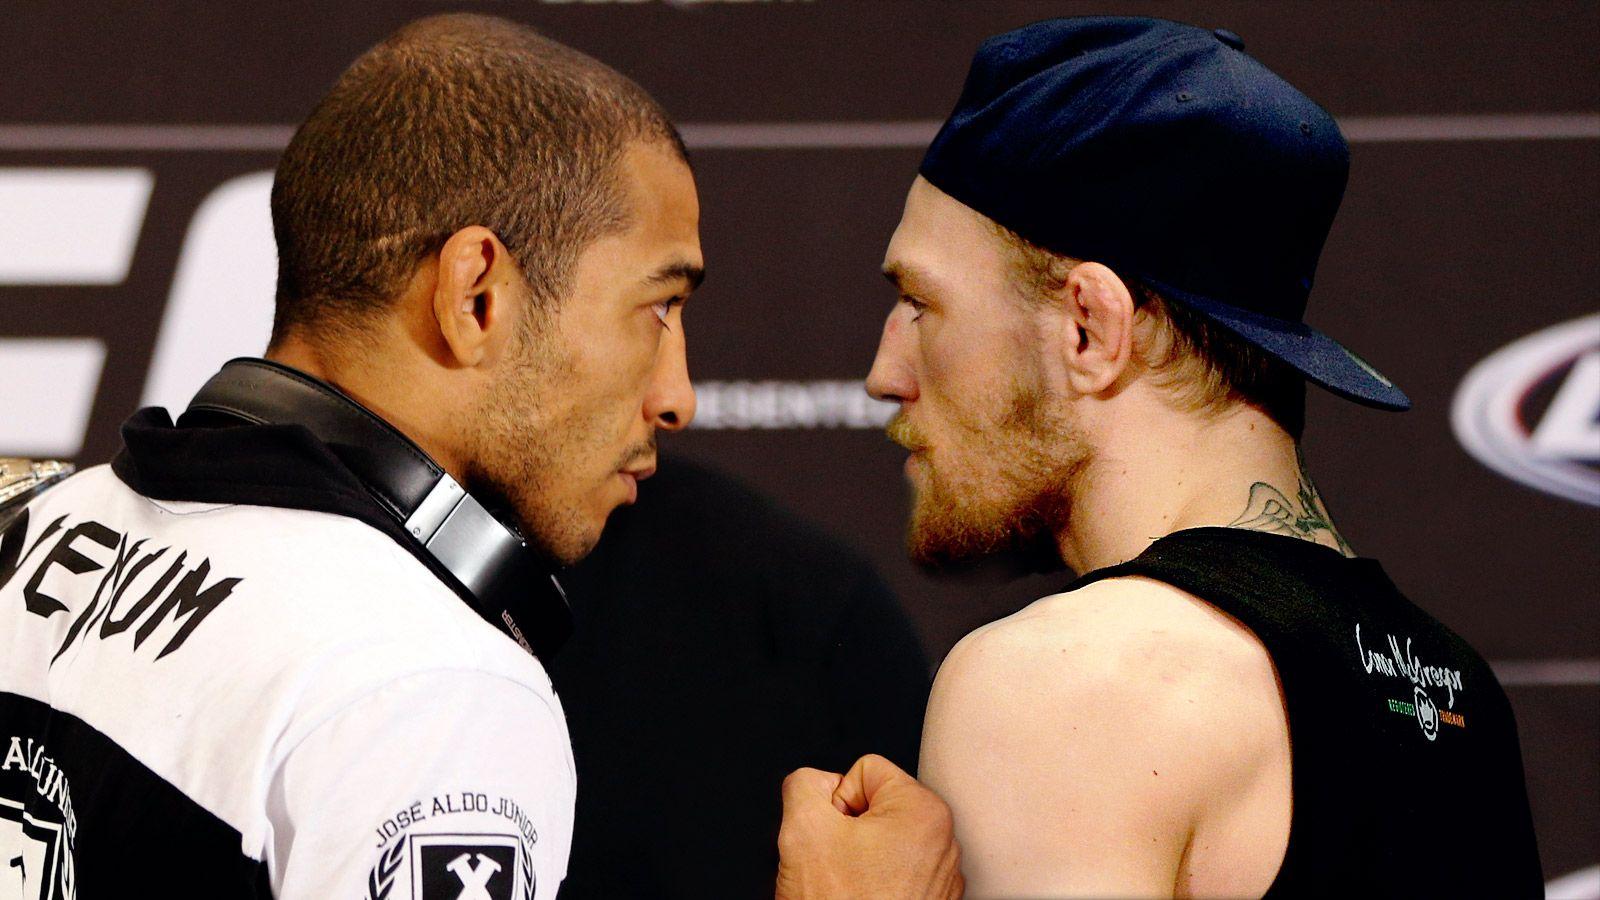 Drug test collection report for Jose Aldo and Conor McGregor